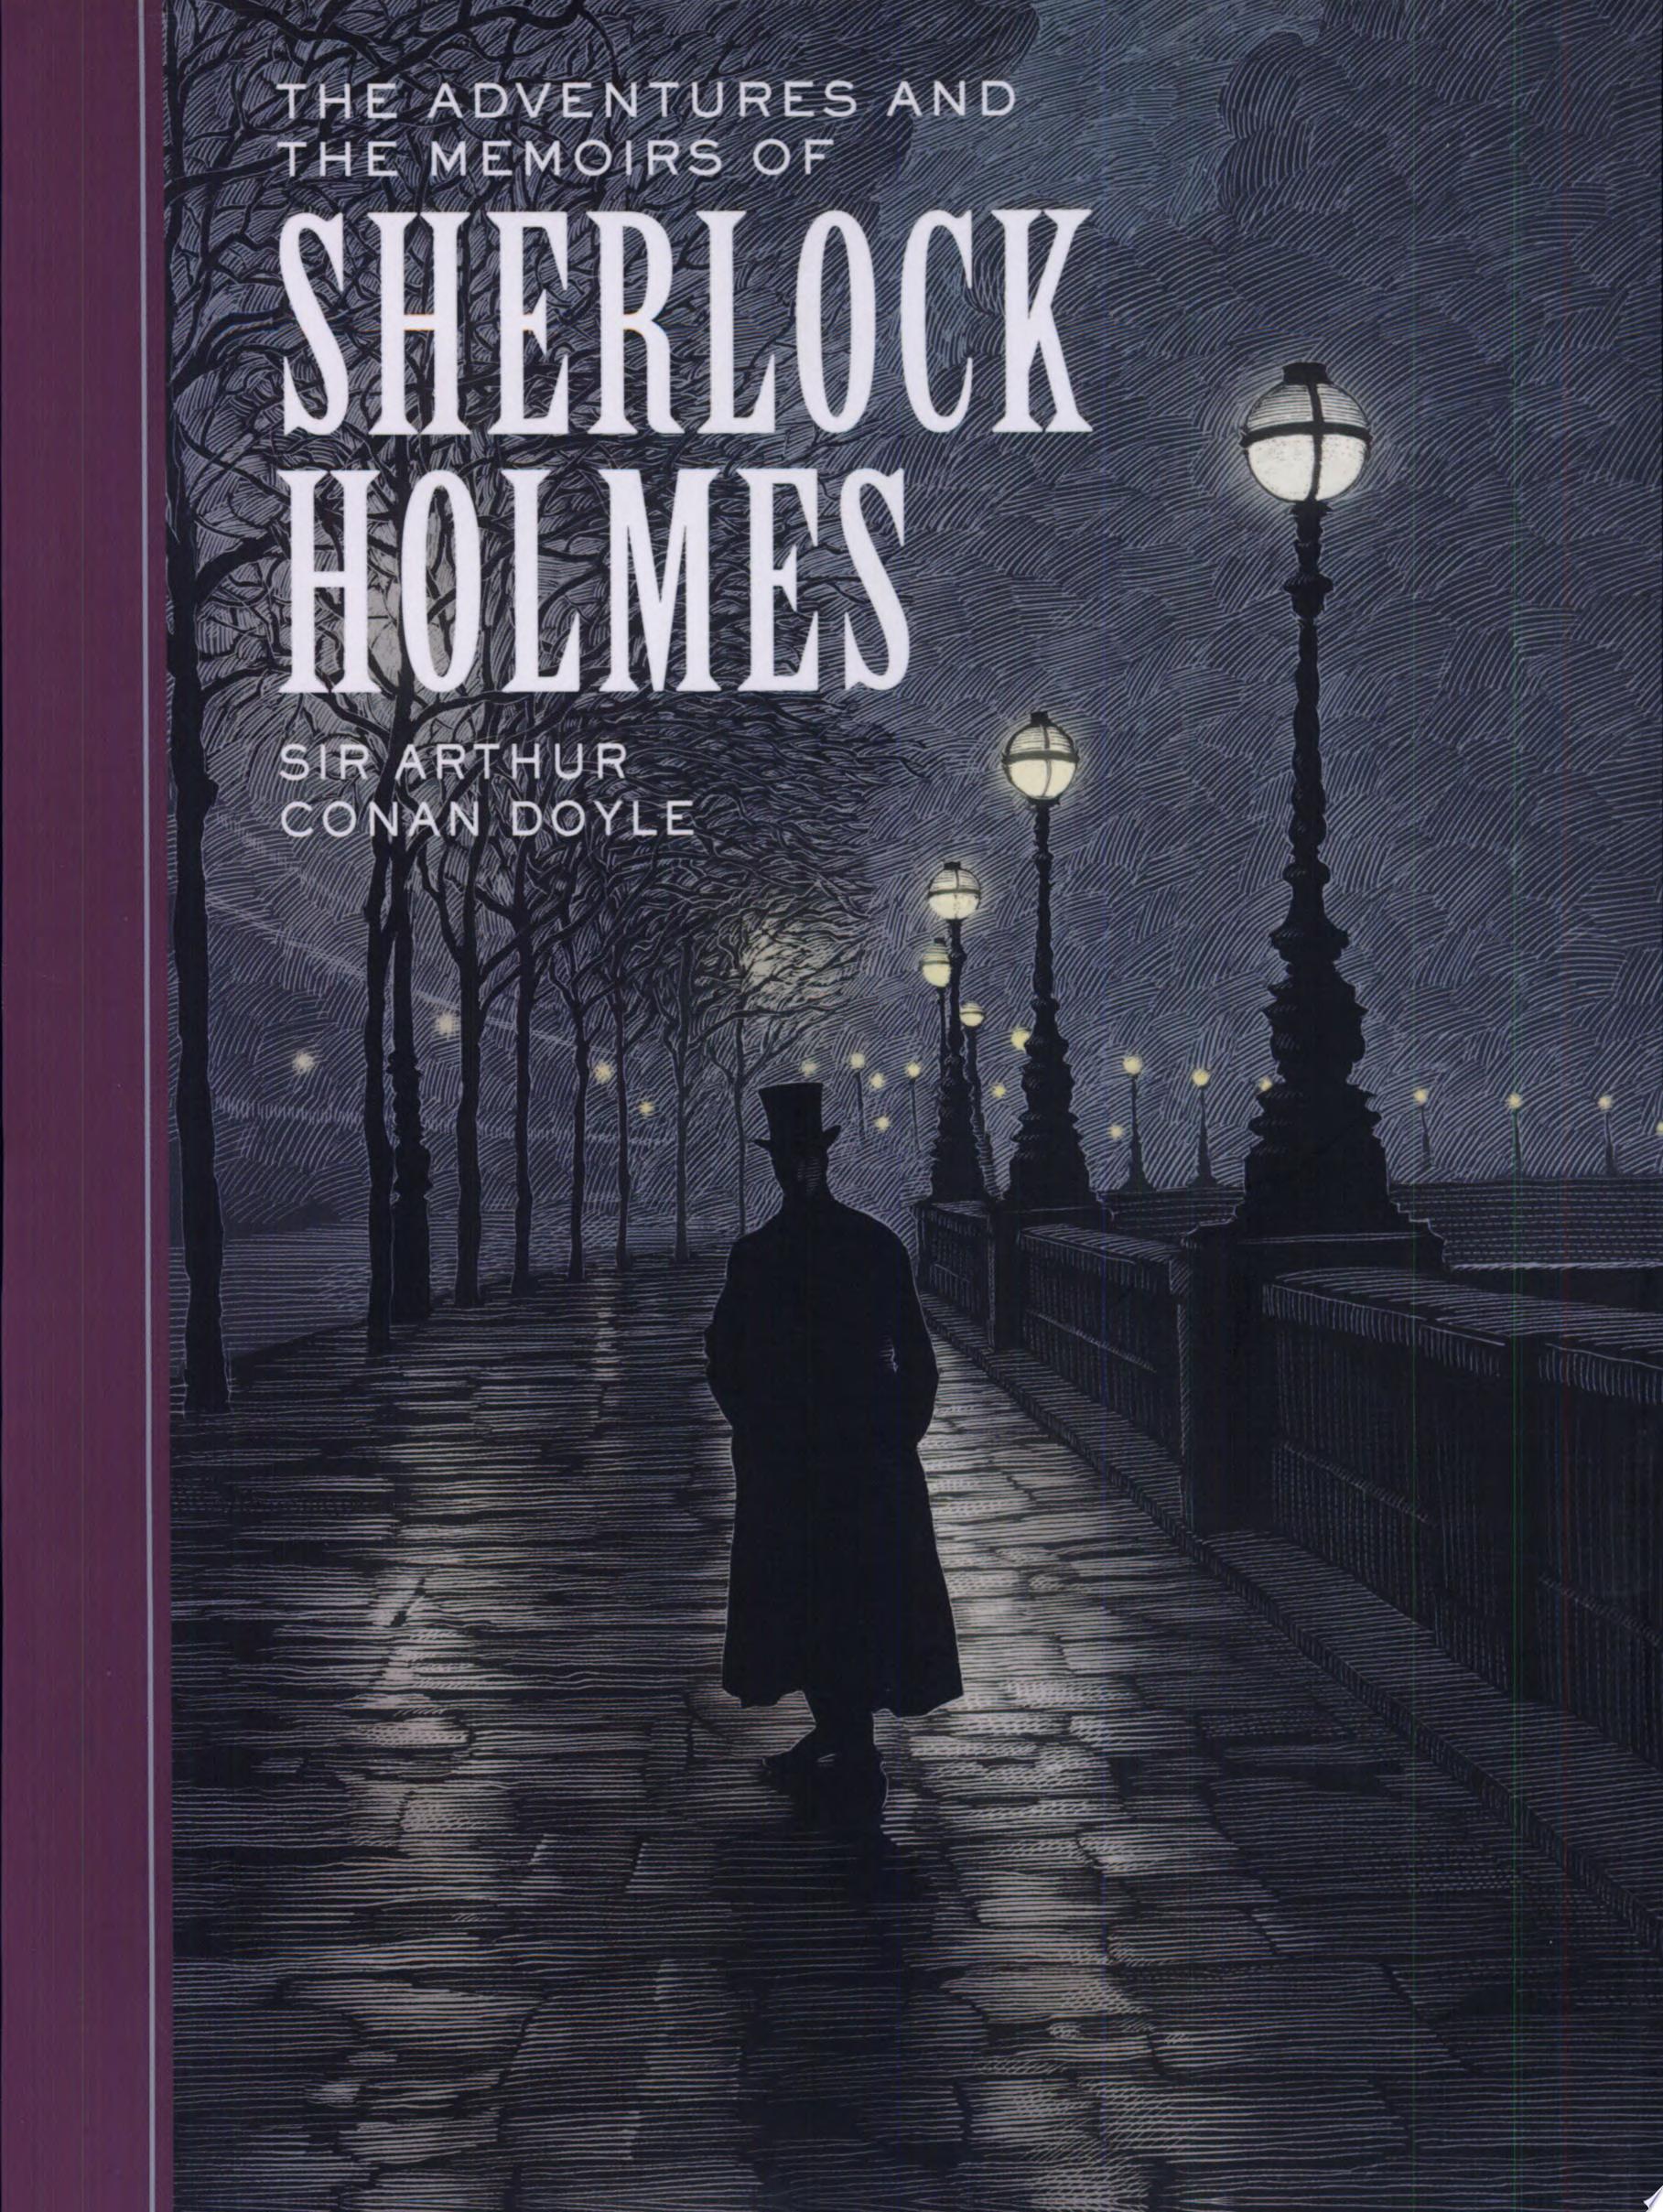 Image for "The Adventures and the Memoirs of Sherlock Holmes"